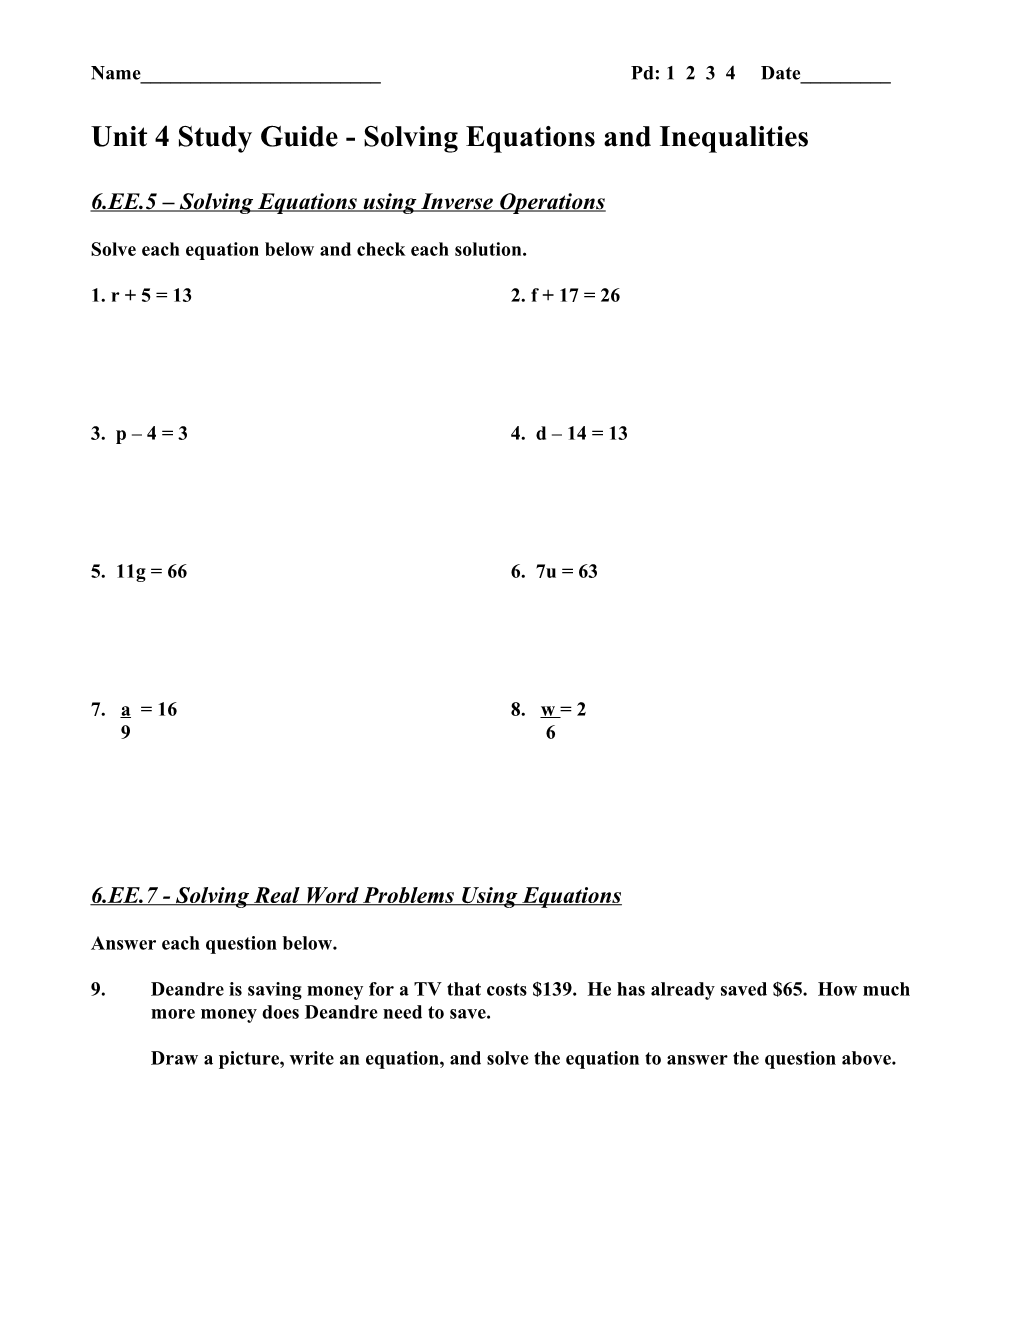 Unit 4 Study Guide - Solving Equations and Inequalities